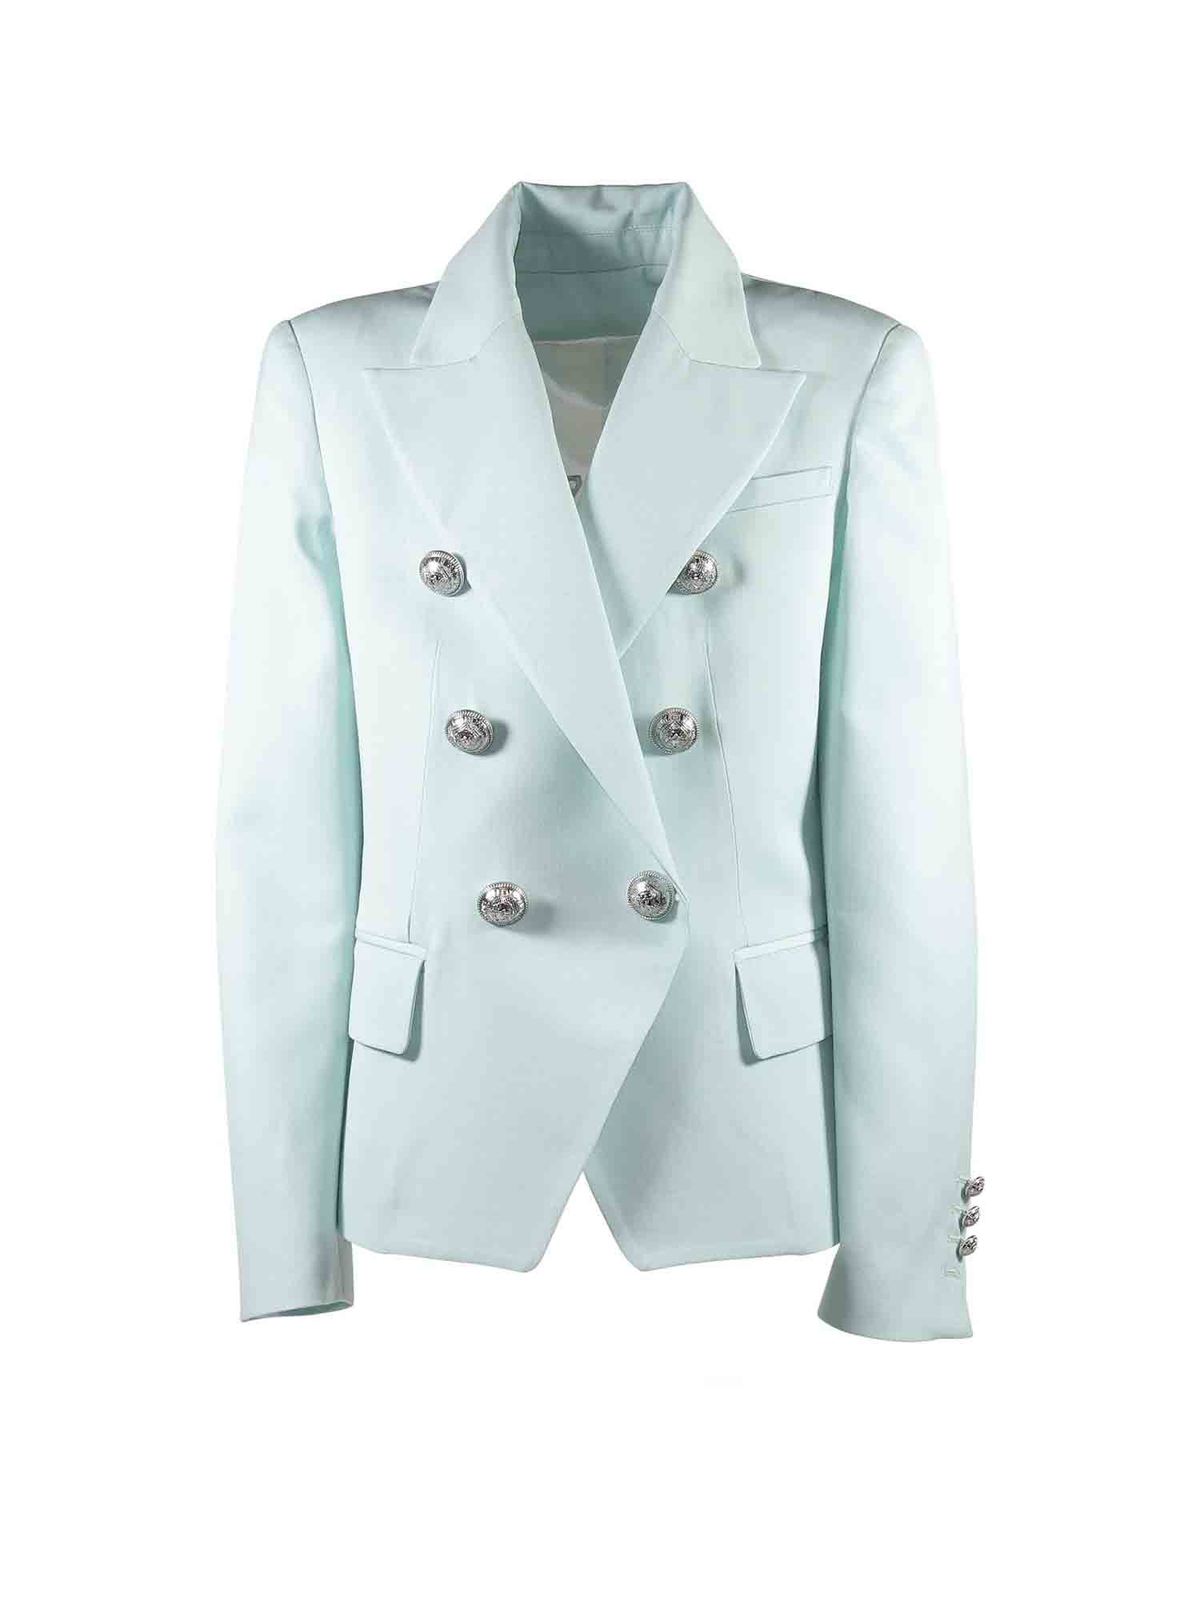 BALMAIN JACKET IN LIGHT BLUE WITH EMBOSSED BUTTONS